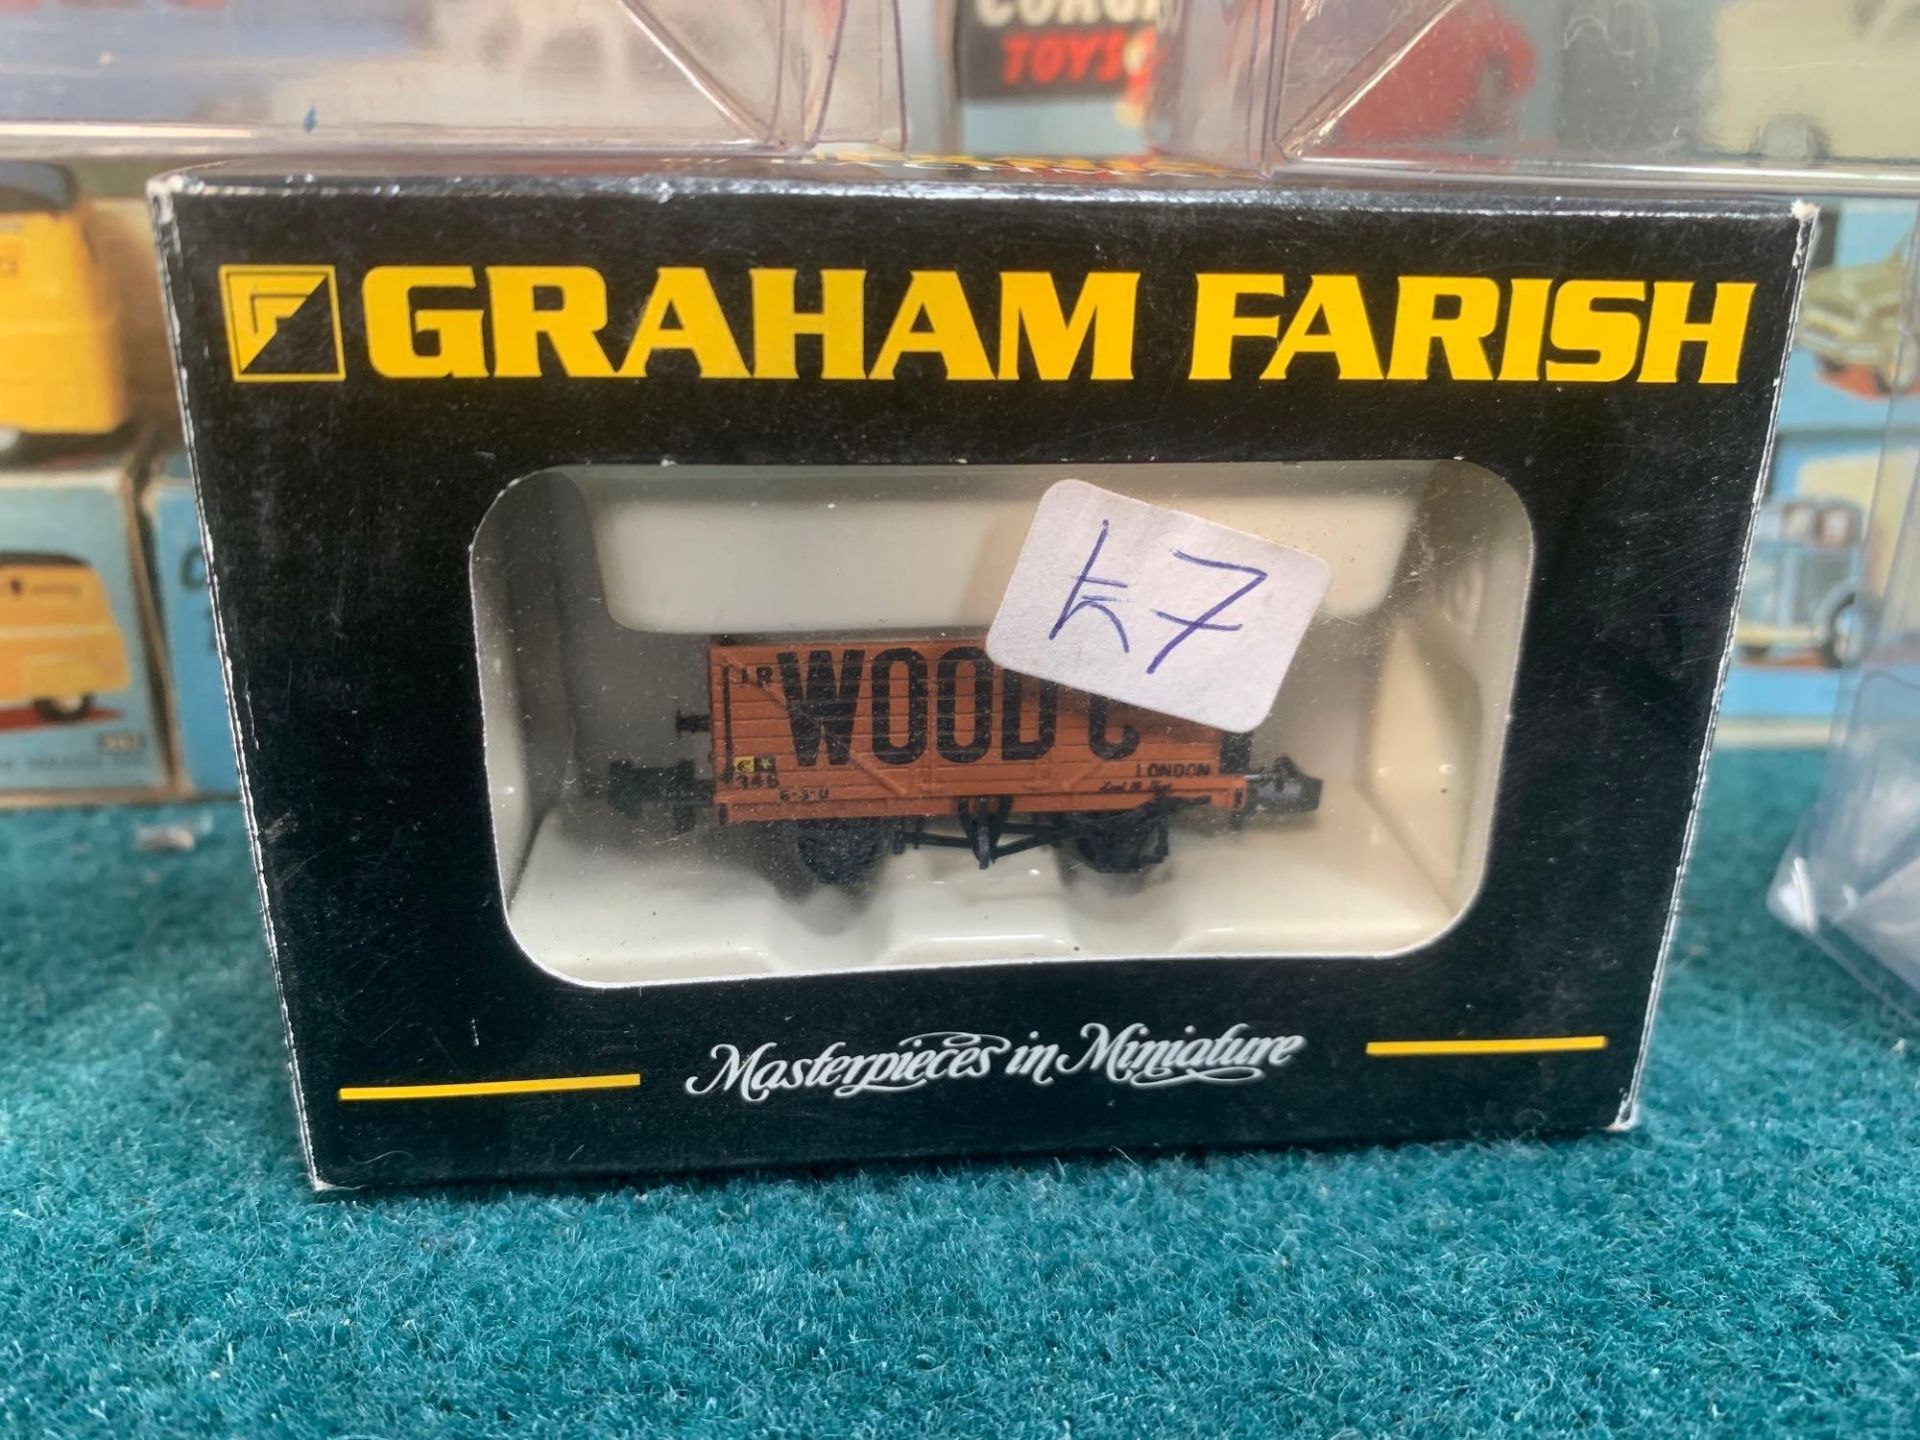 9 X Miniature Railway Models Includes Graham Farrish Models And PECO Models Carriageways Trains - Image 10 of 12